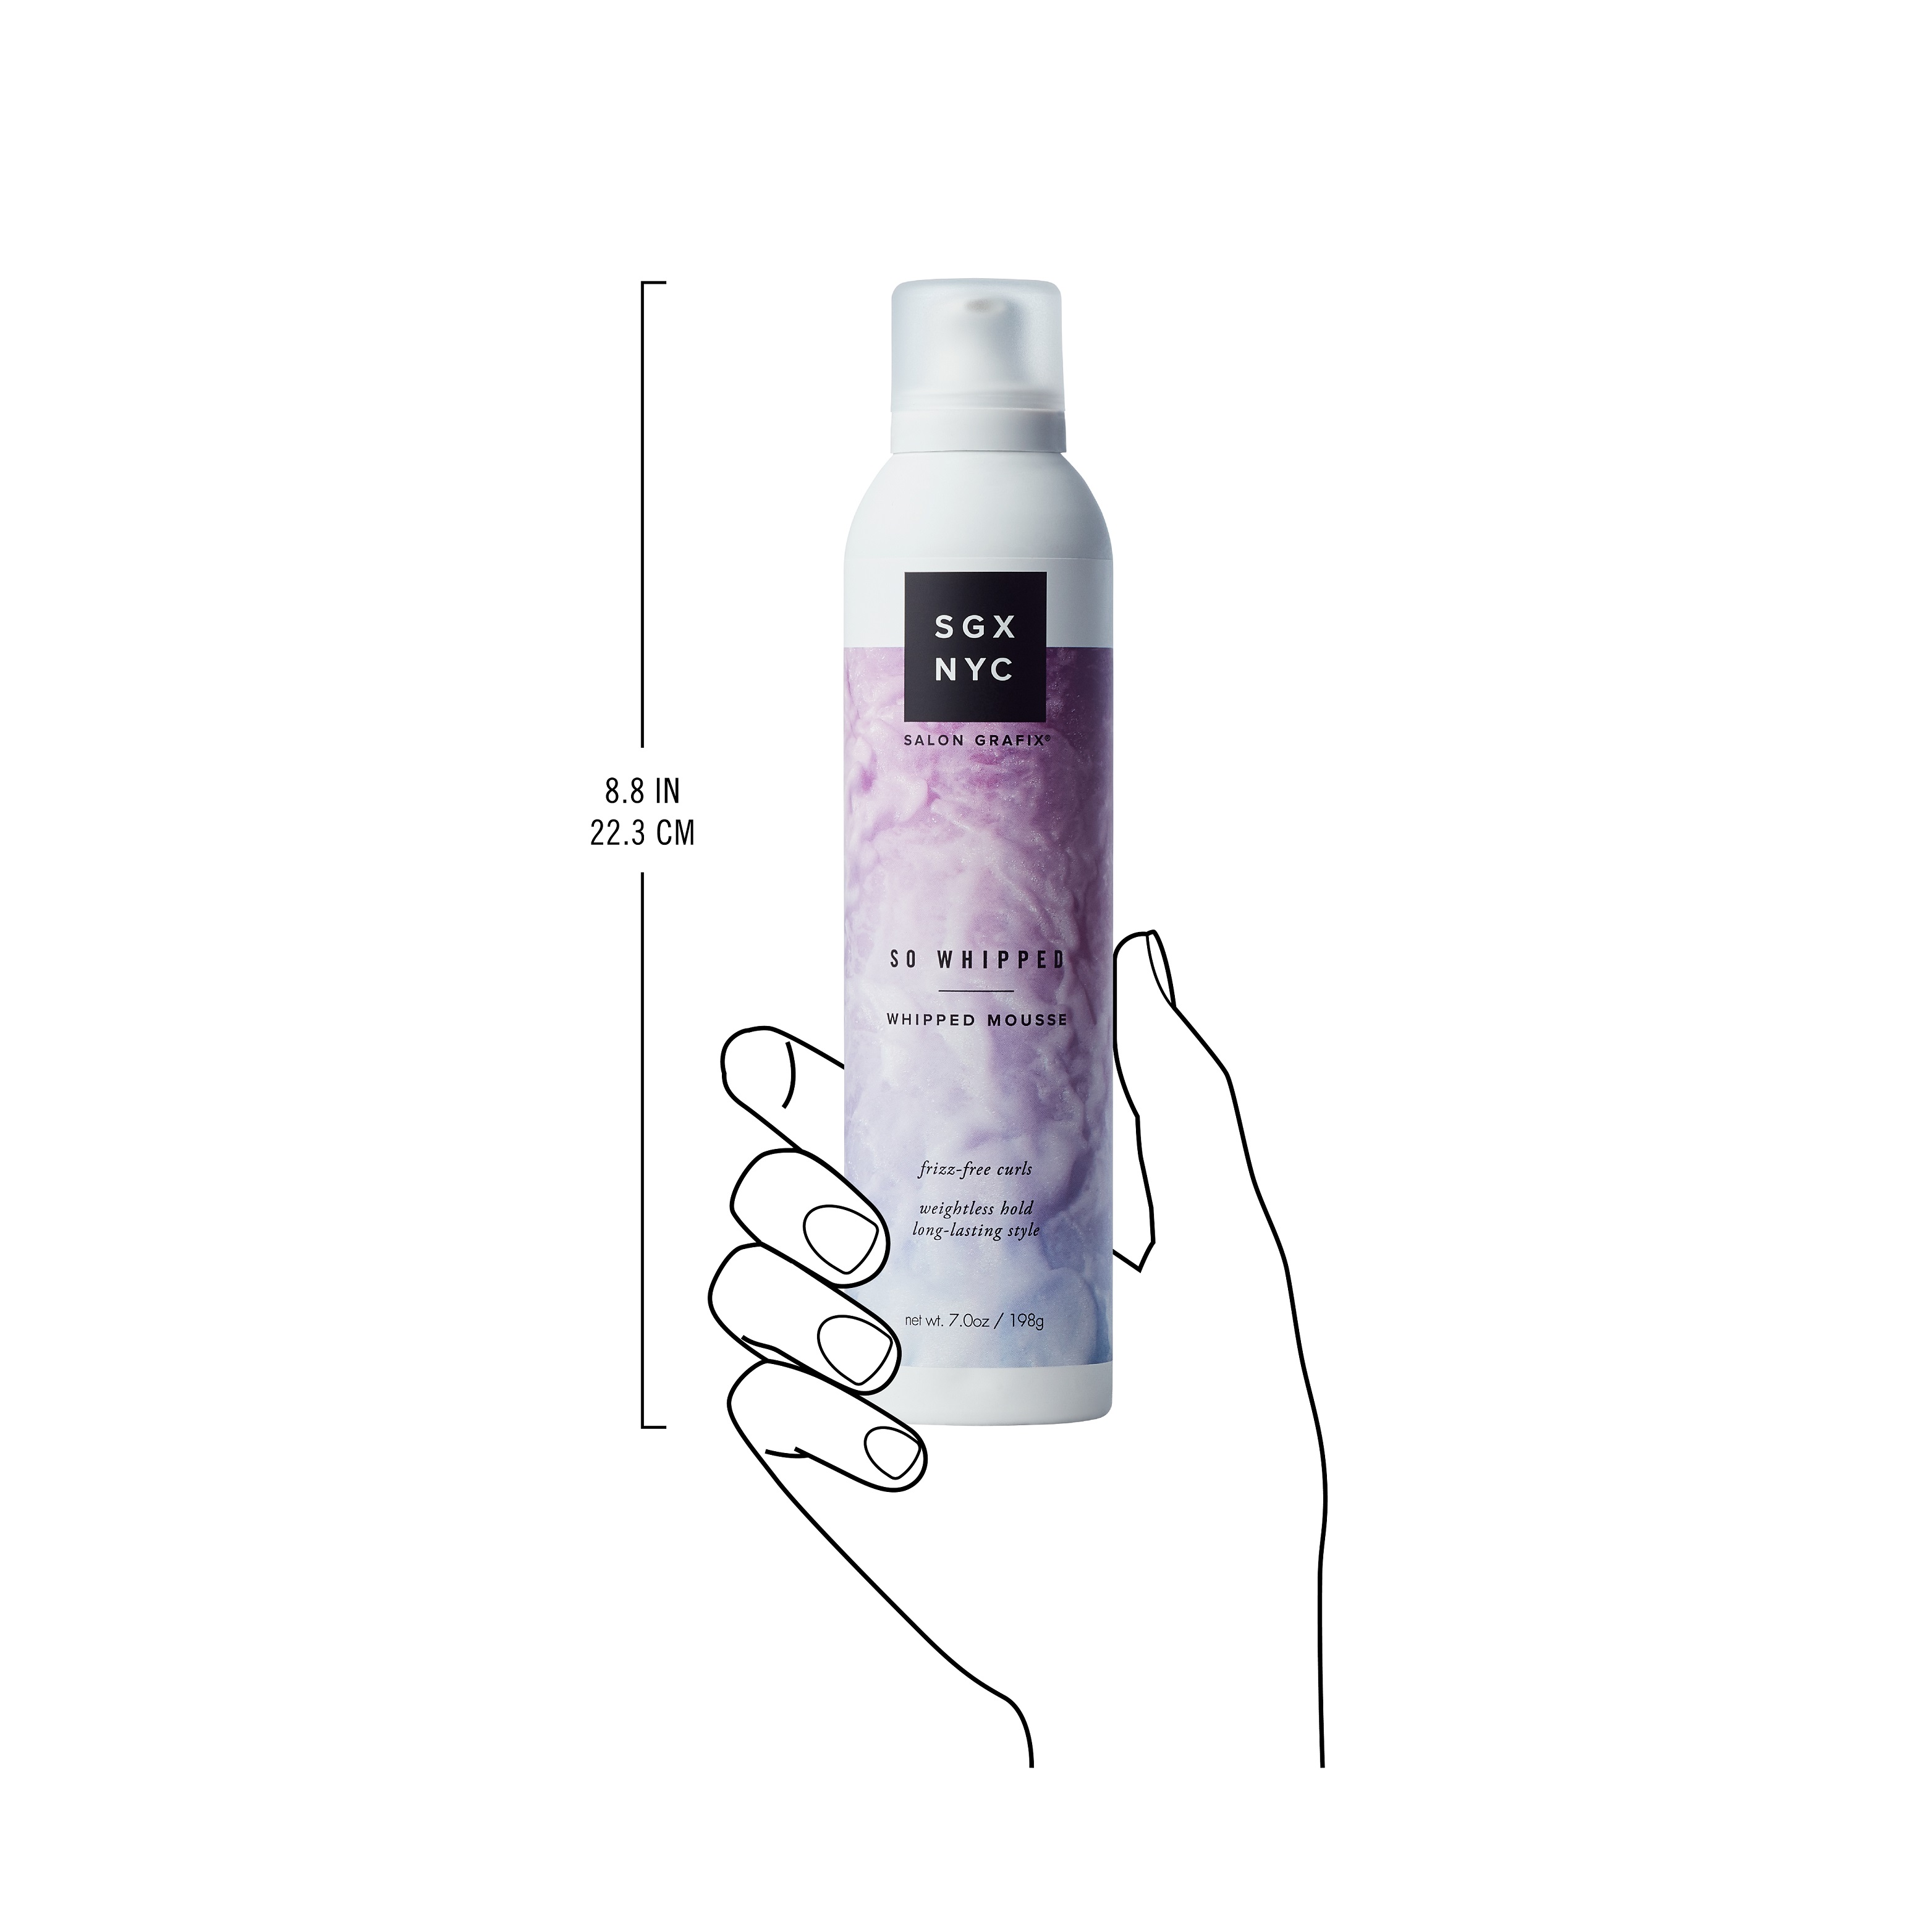 SGX NYC So Whipped Mousse For Nonstop Curls And Waves - image 3 of 6